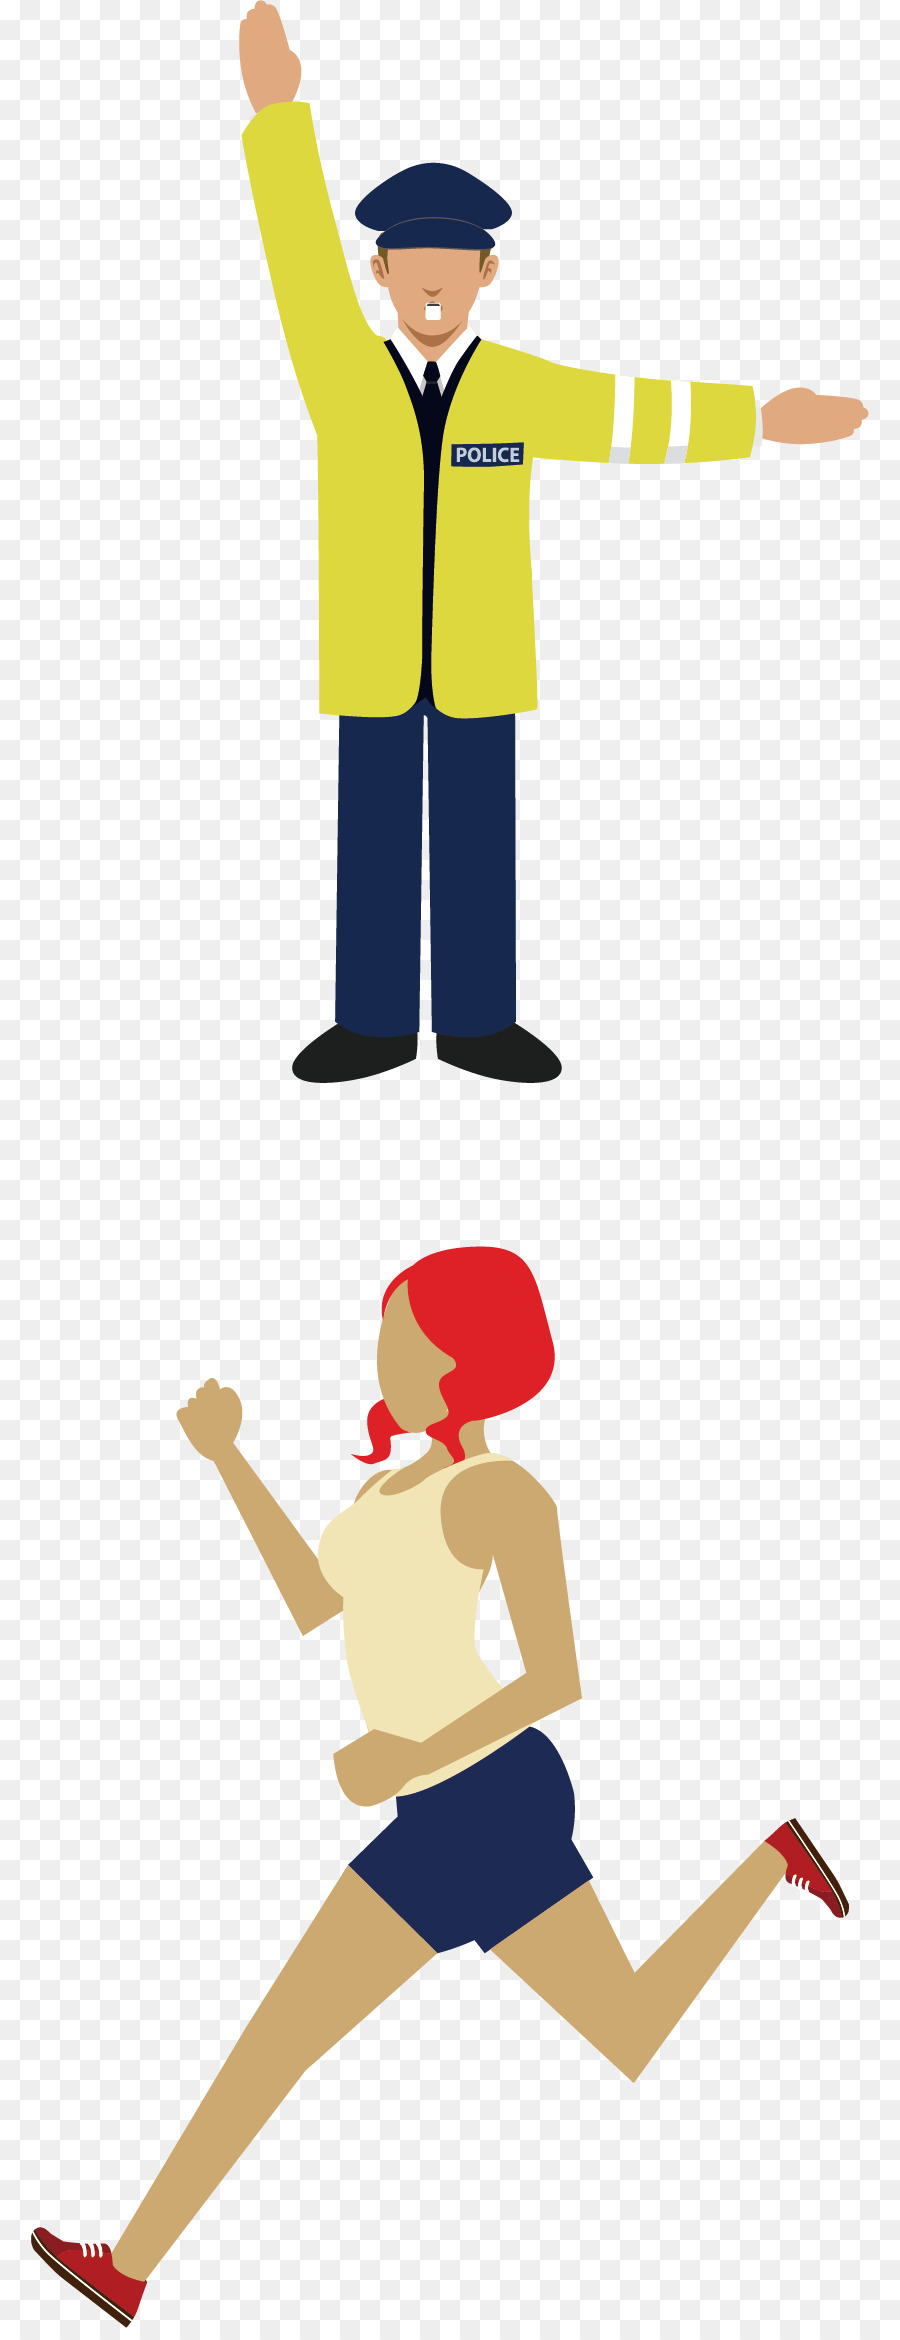 Walking clipart - Charakter Polizei-Comic-Poster-Werbematerial